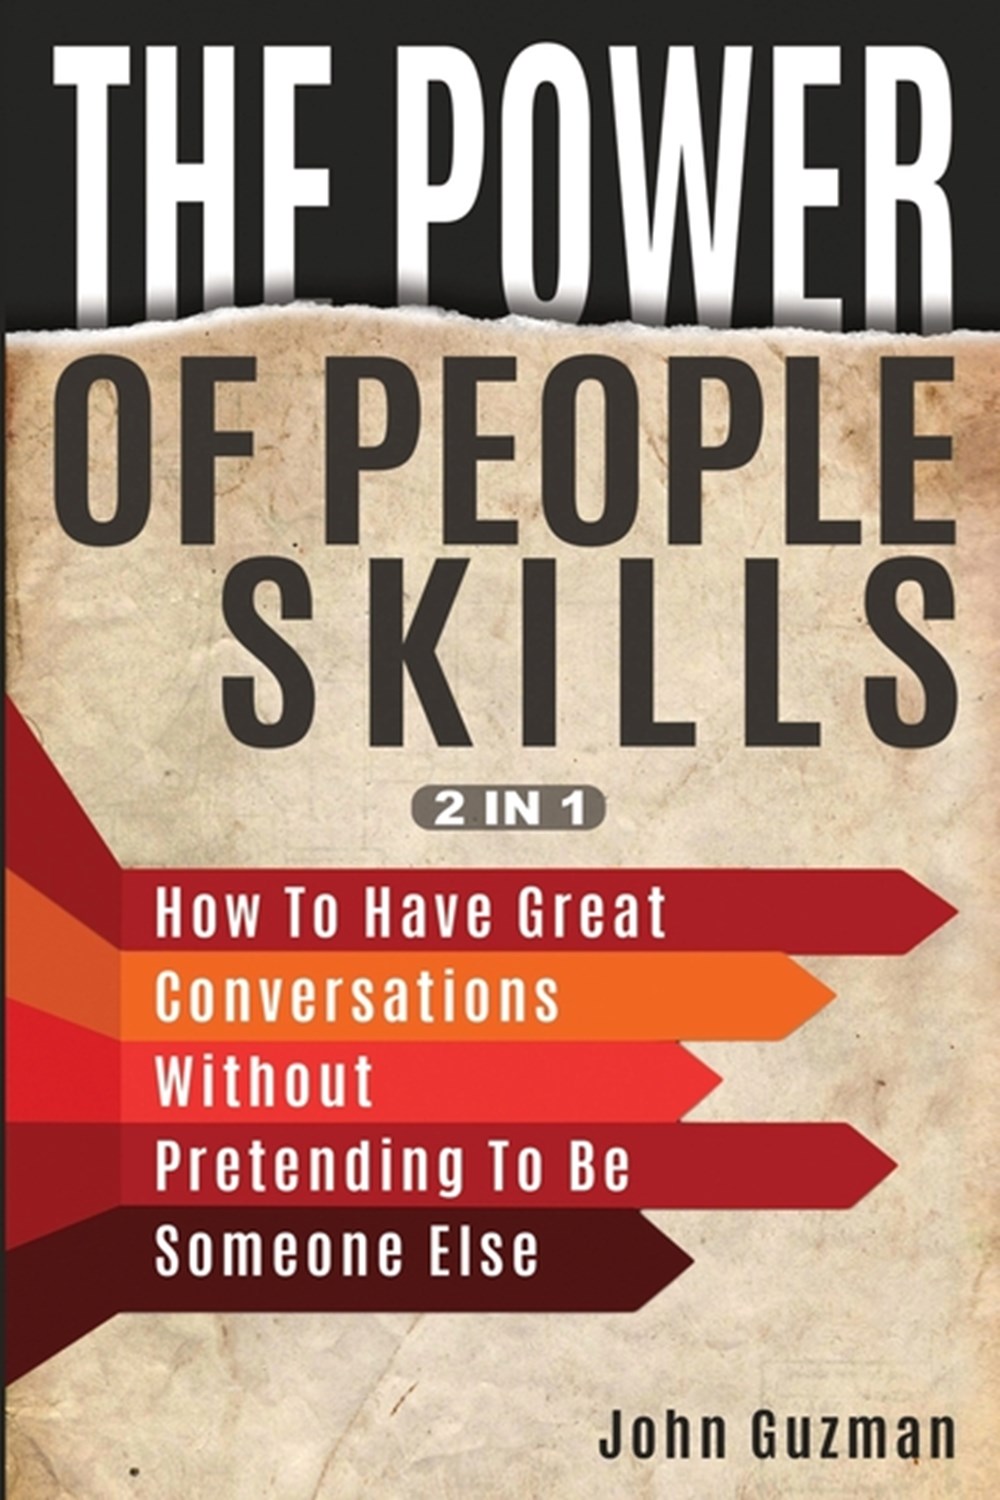 Power Of People Skills 2 In 1: How To Have Great Conversations Without Pretending To Be Someone Else